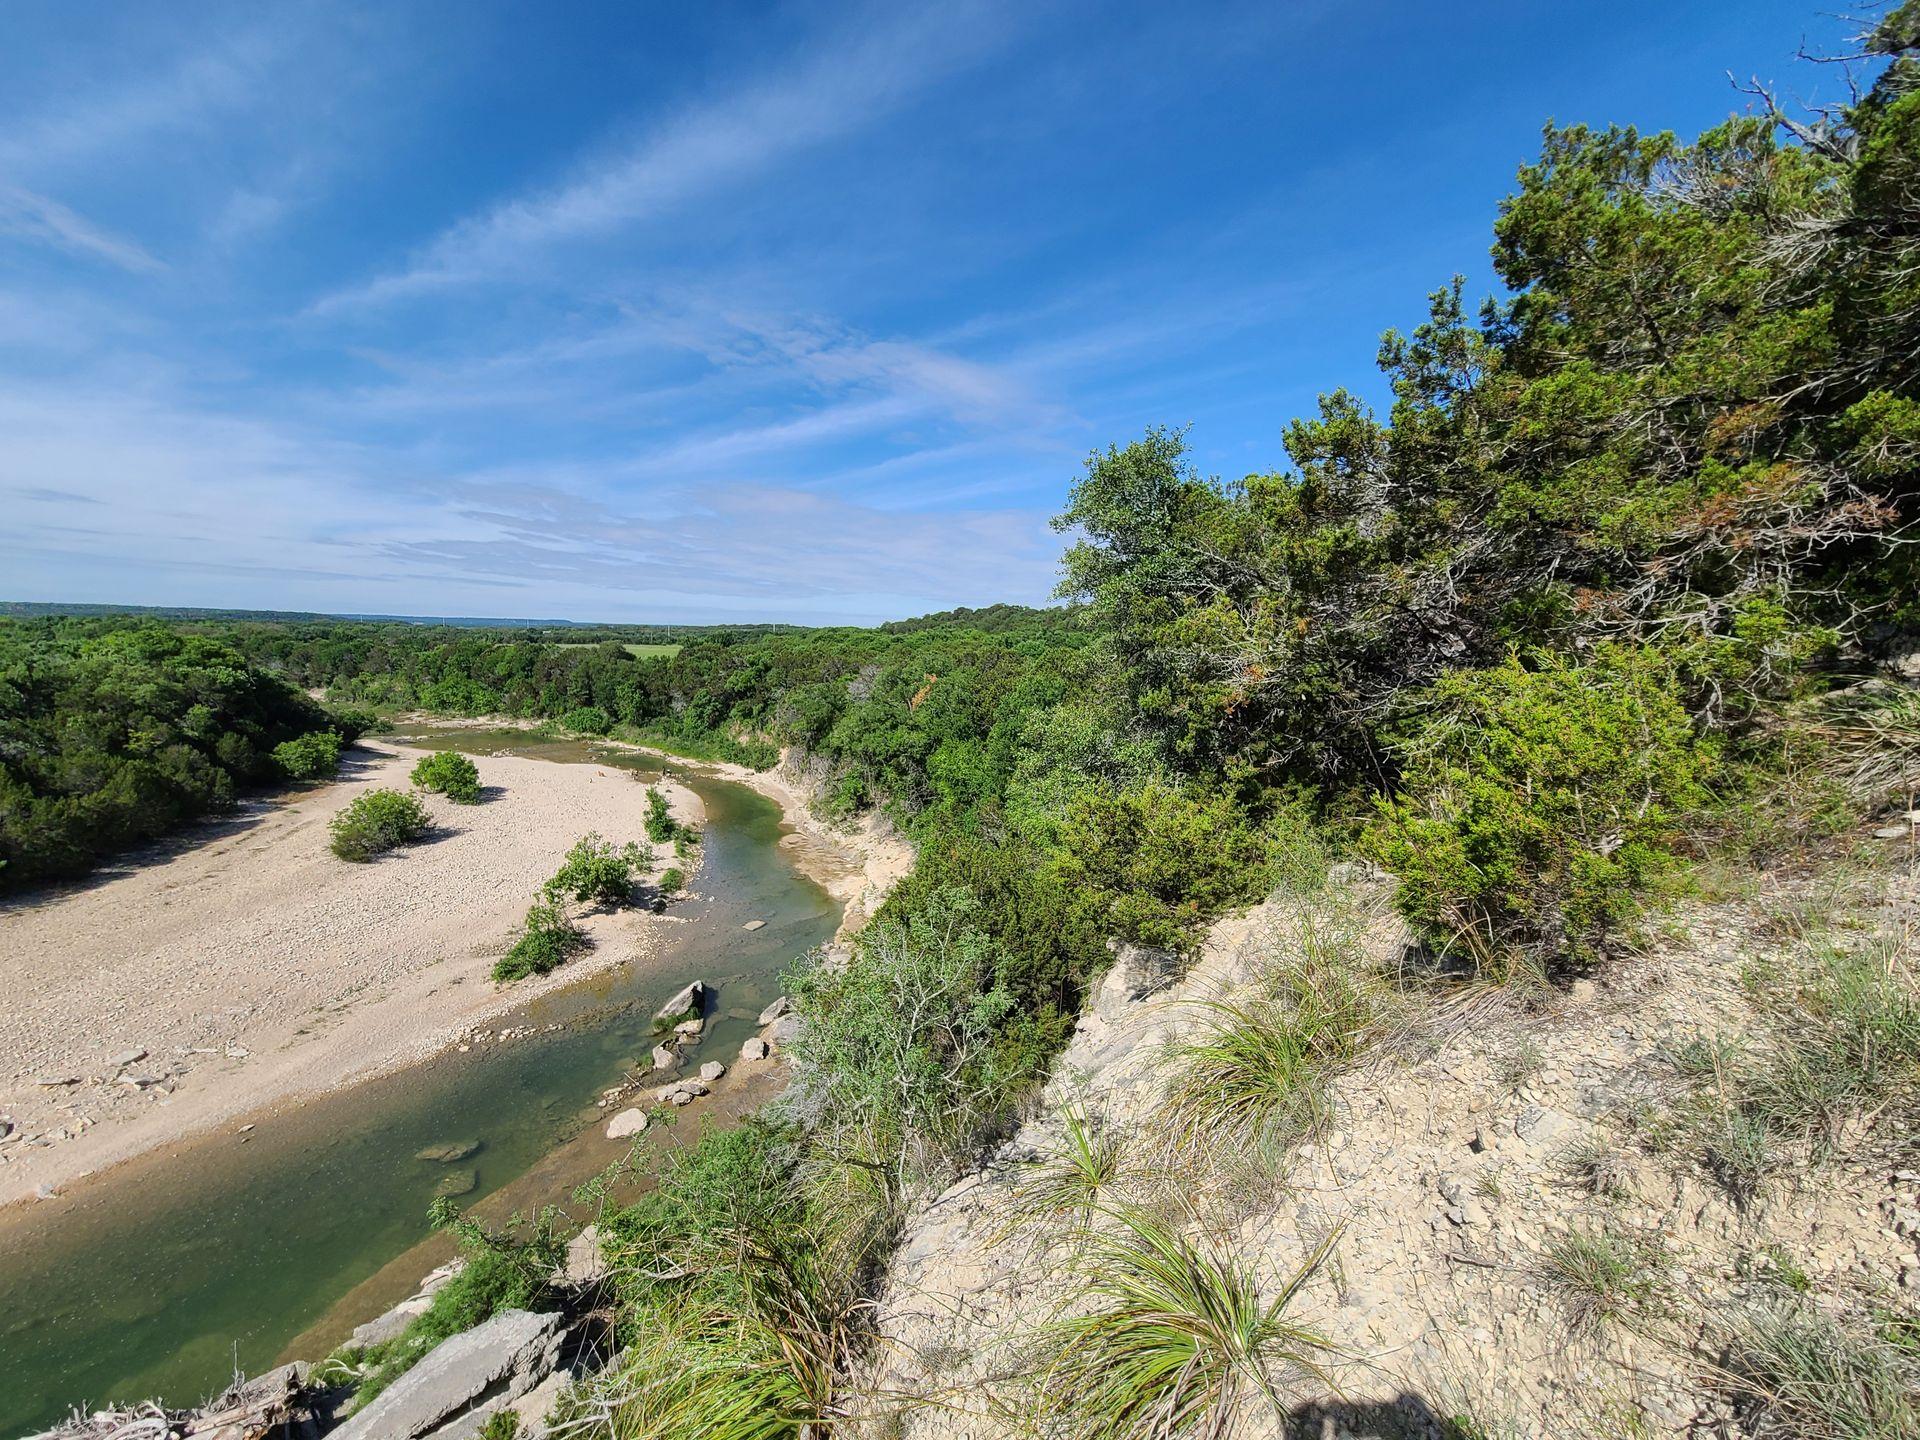 An overlook of the Paluxy River at Dinosaur Valley State Park.